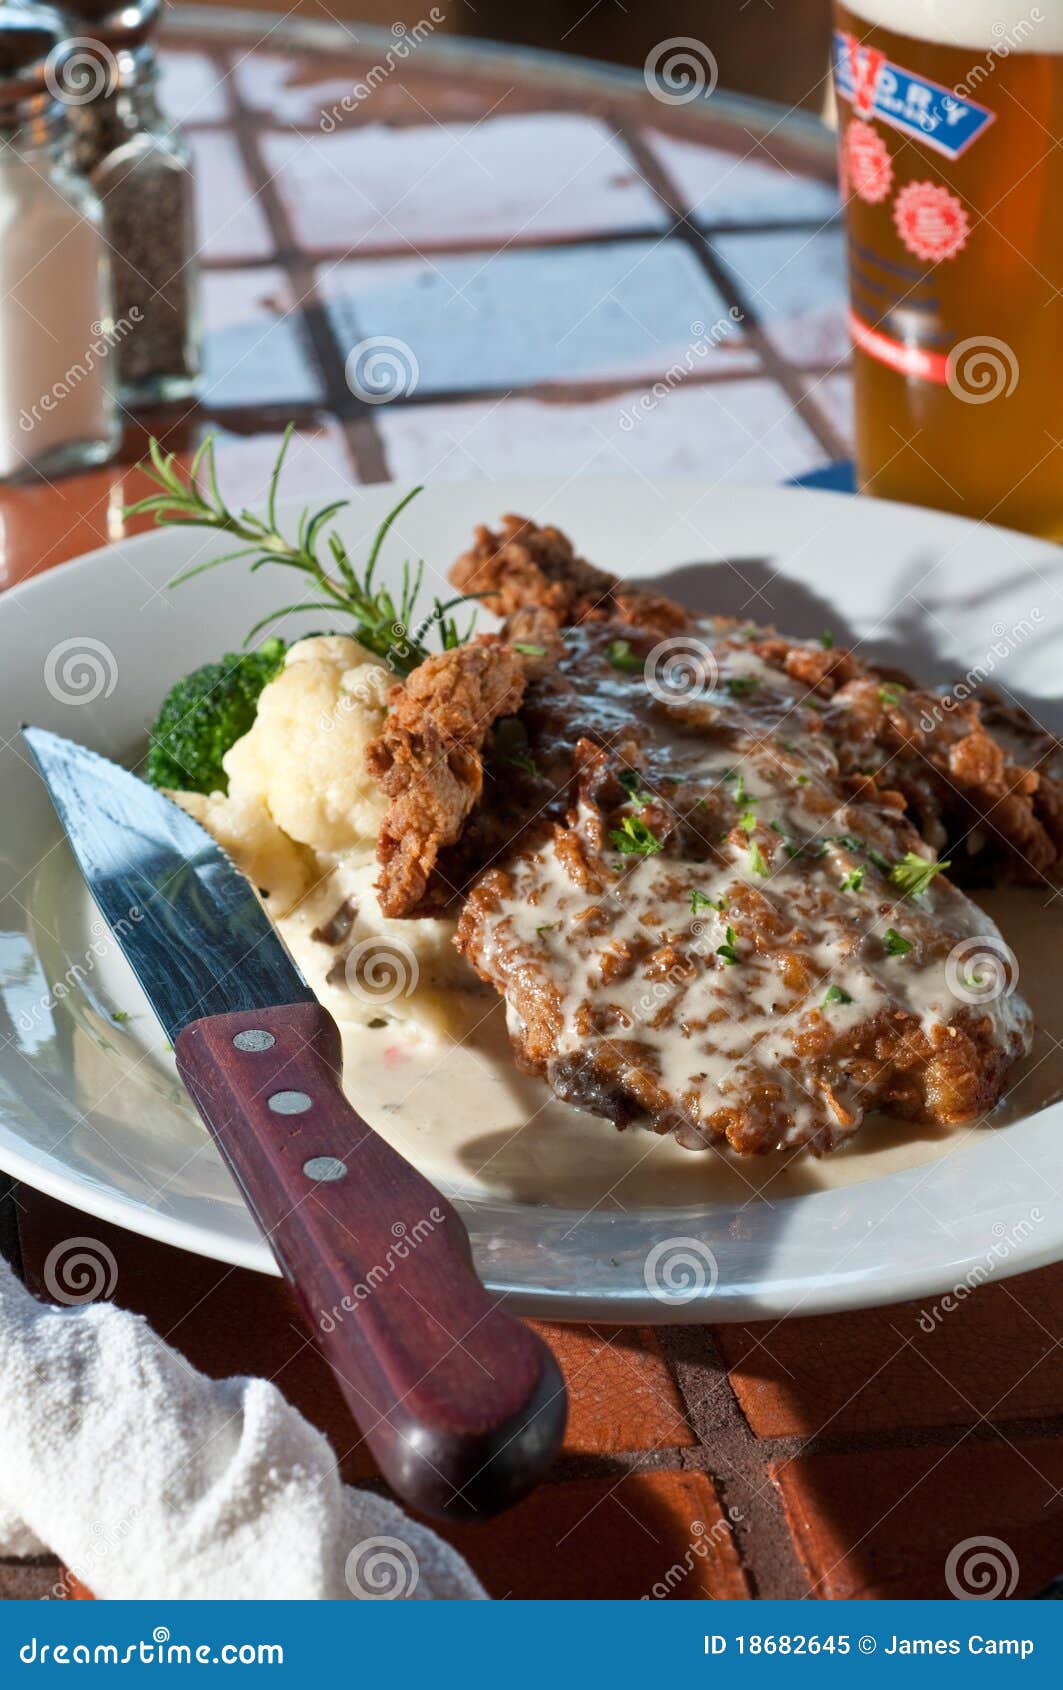 Country Fried Steak with Gravy Stock Image - Image of cauliflower ...